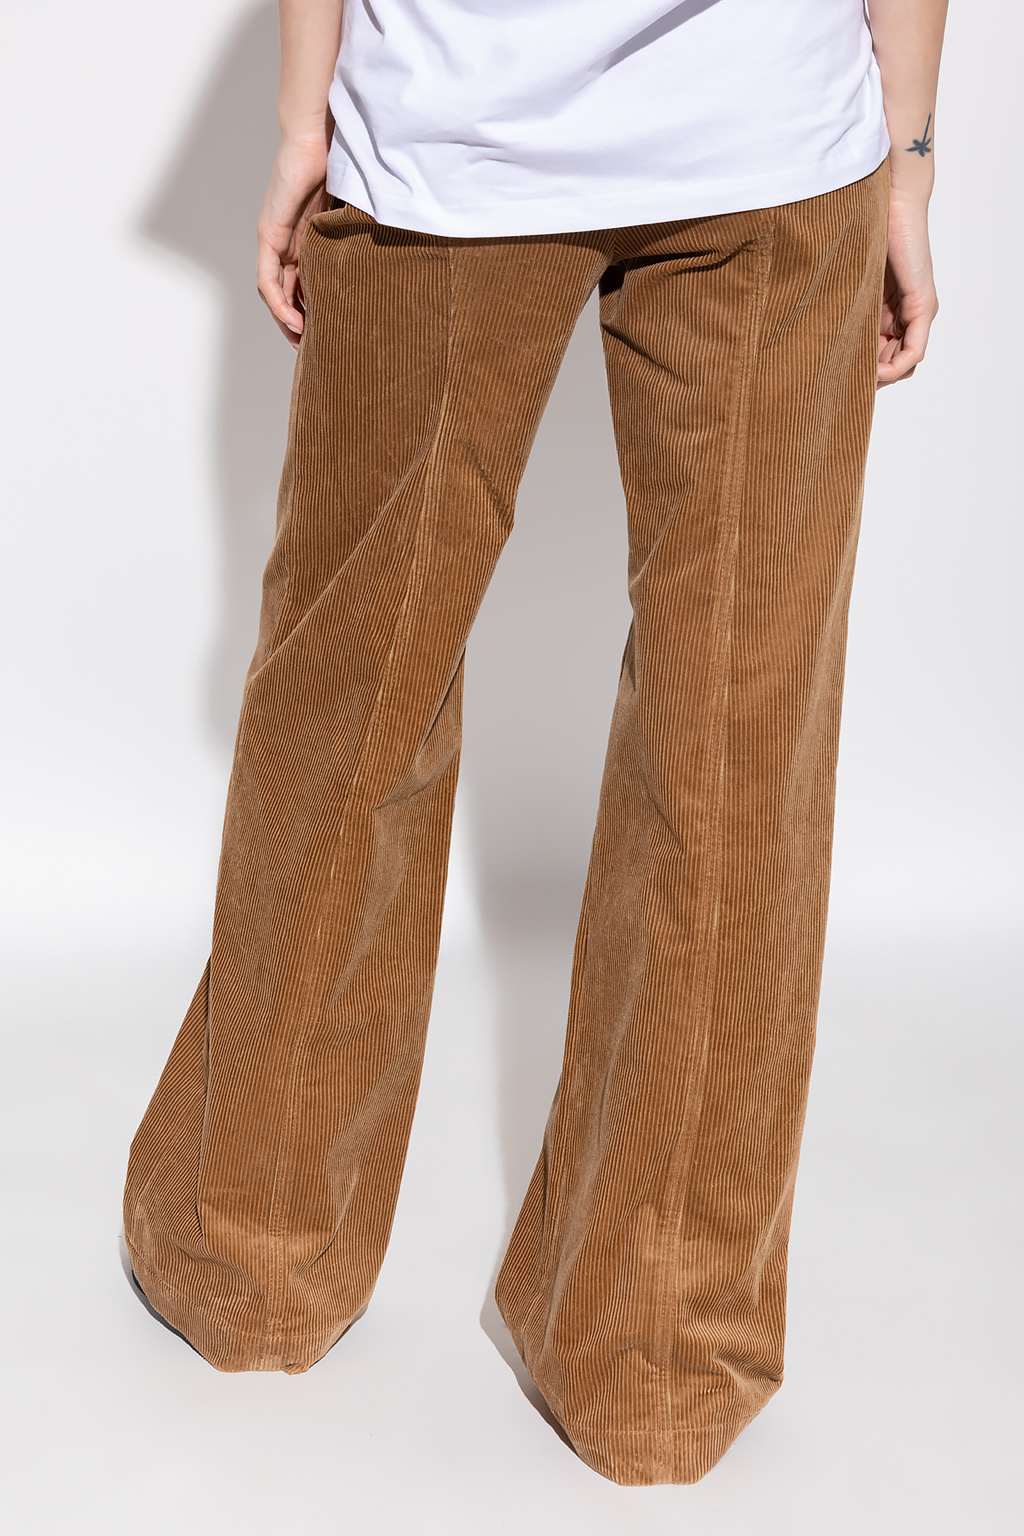 Burberry ‘Blakely’ corduroy trousers